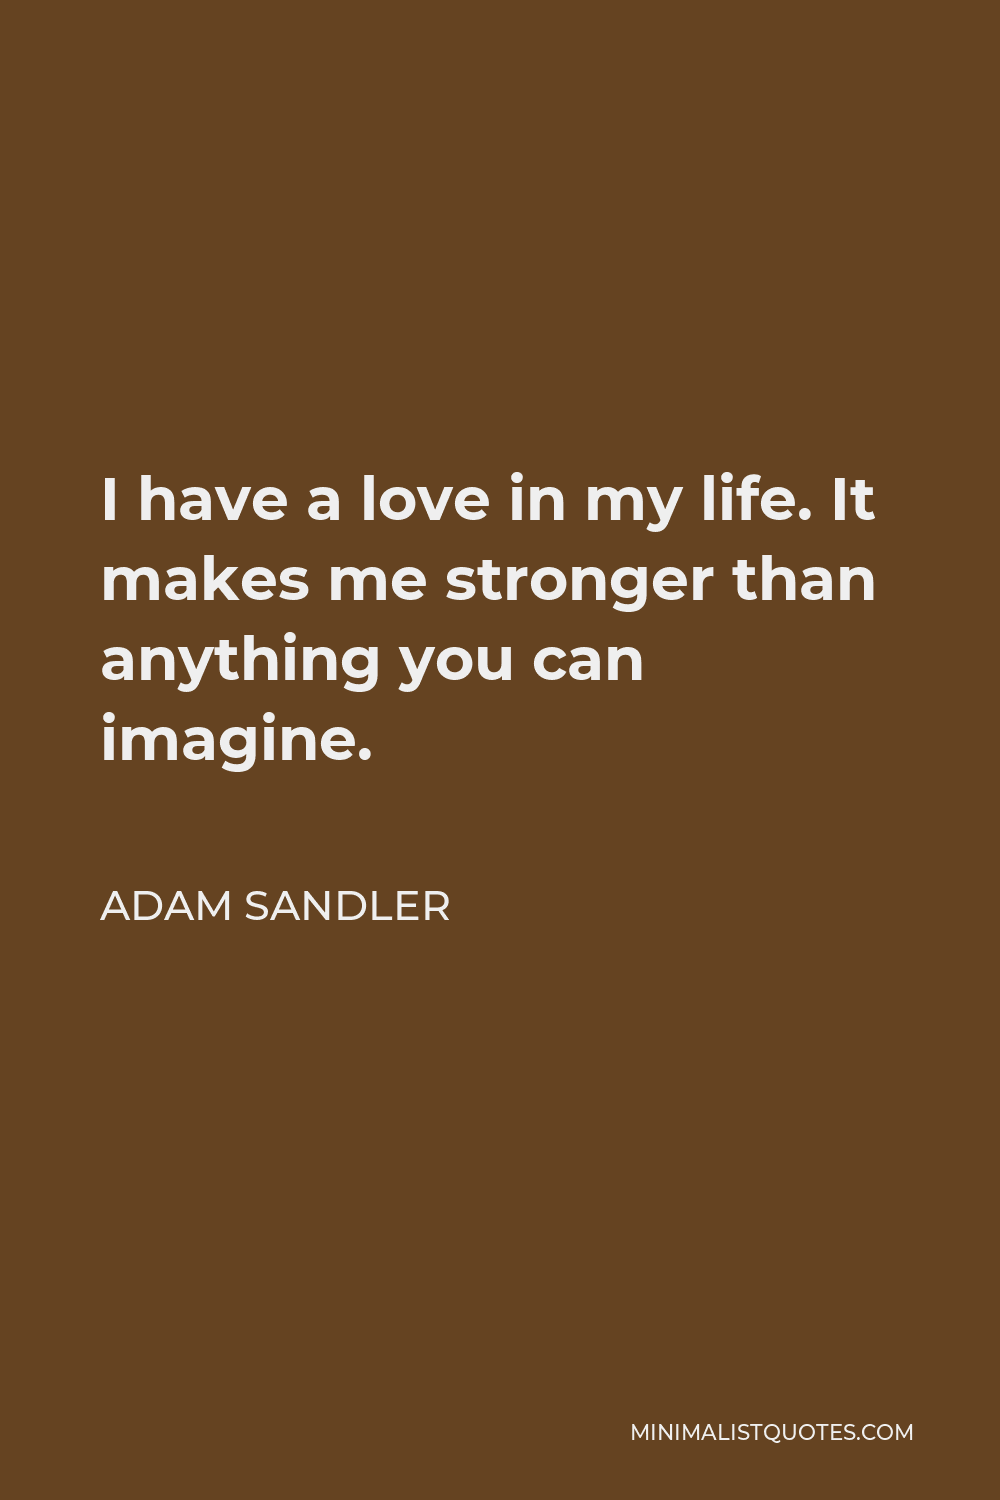 Adam Sandler Quote: I have a love in my life. It makes me stronger than  anything you can imagine.